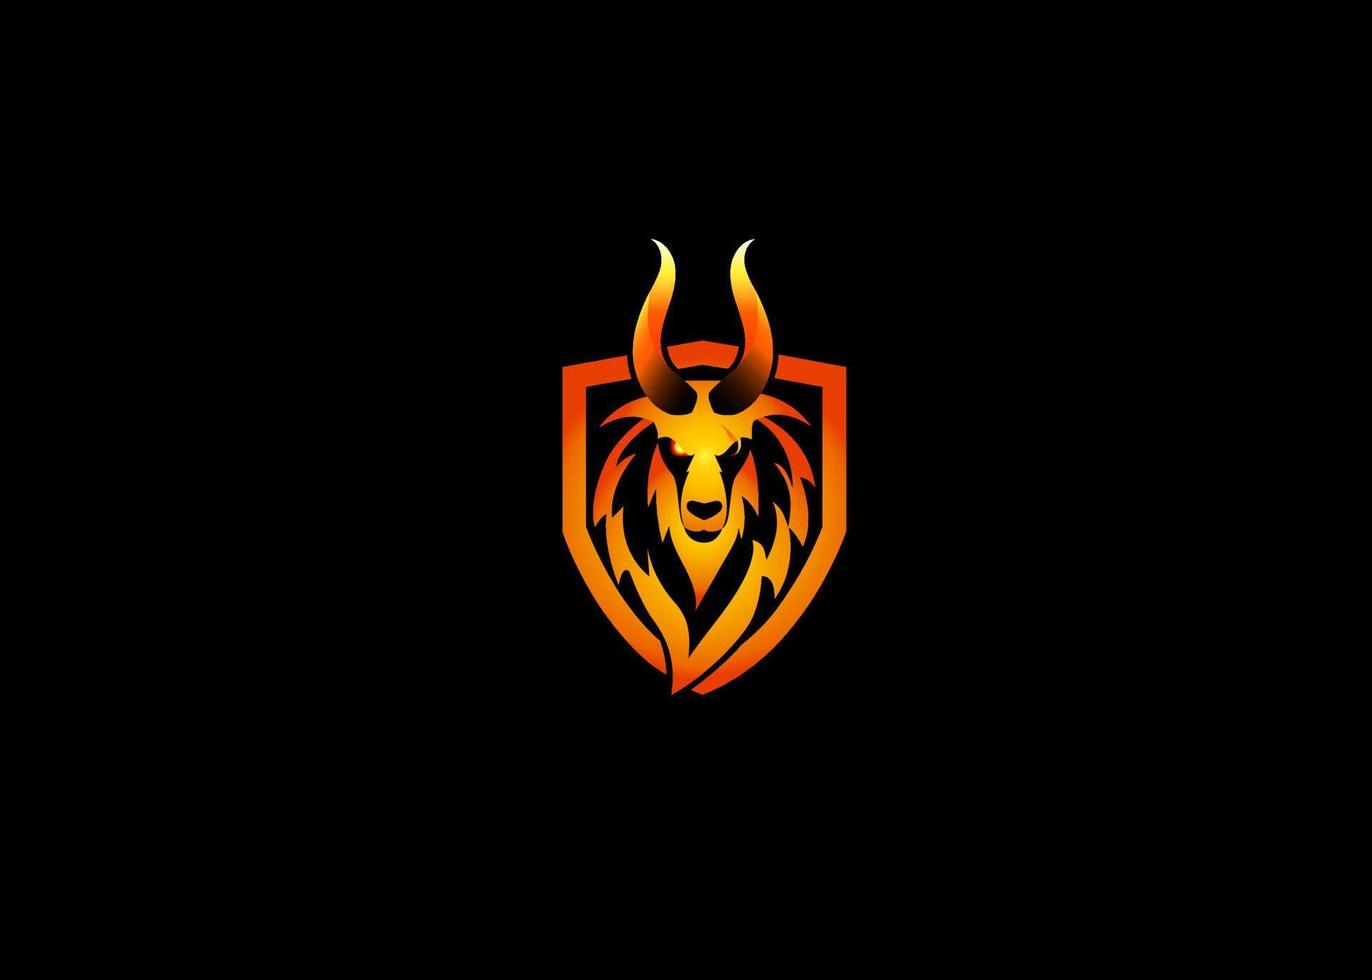 Mountain Goat fire flame shield logo, this logo is perfect for your E sport team or other sport team logo vector